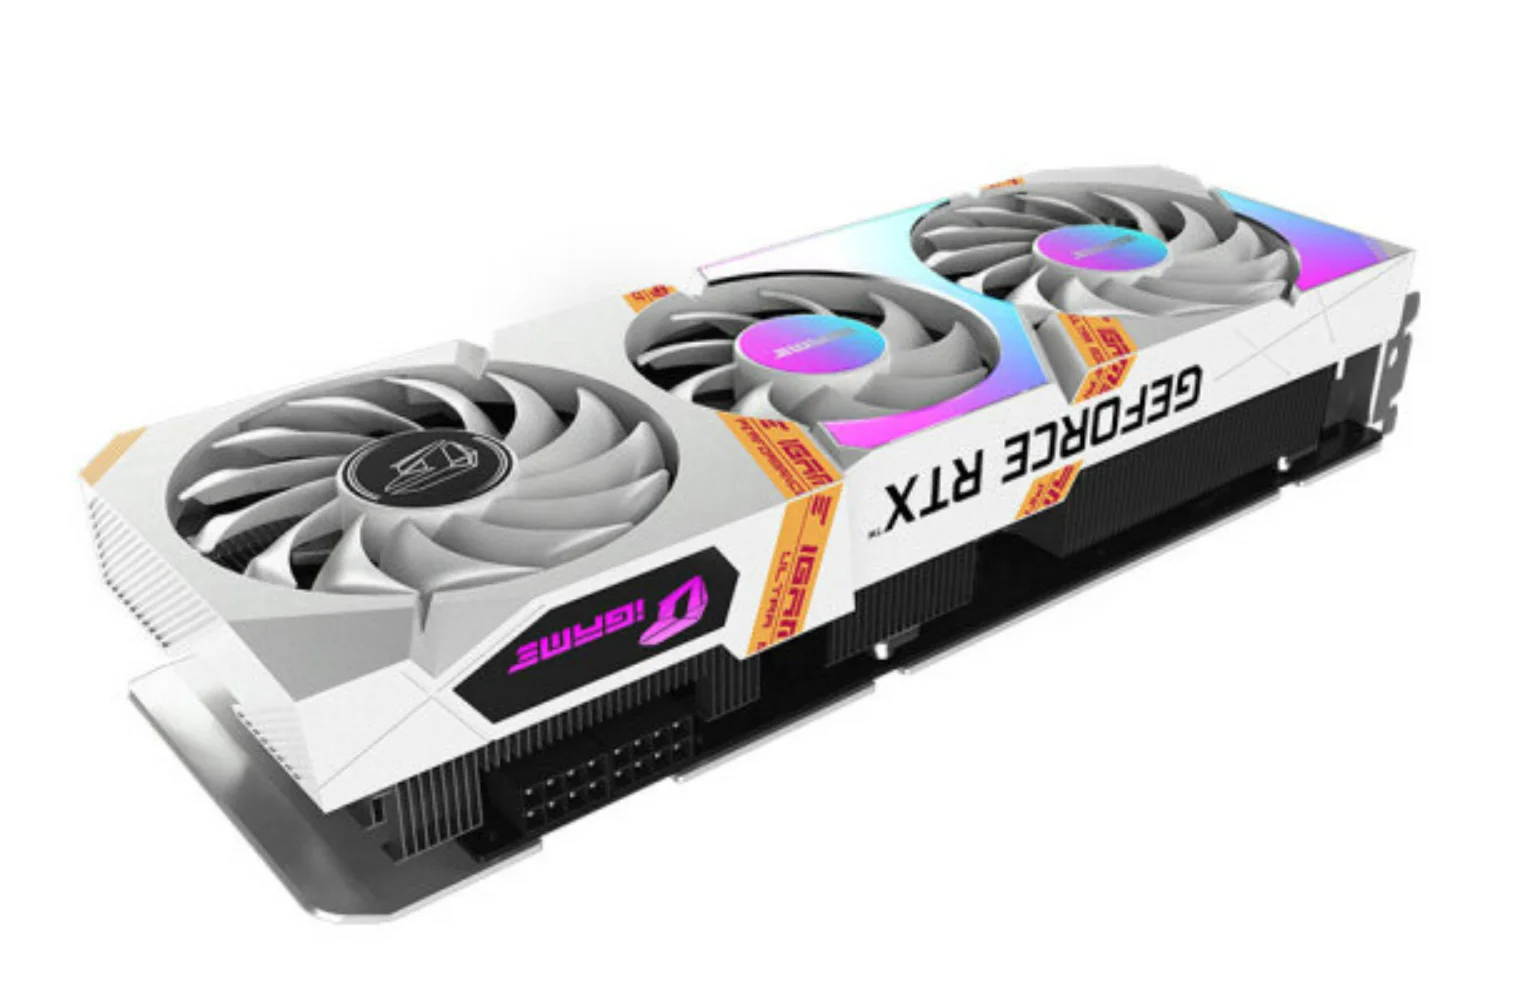 Colorful geforce rtx 3060 12. Colorful RTX 3060 12gb. Colorful IGAME GEFORCE RTX 3060 ti Ultra w OC. Colorful GEFORCE RTX 3060 12 ГБ (IGAME GEFORCE RTX 3060 Ultra w OC 12g l-v), LHR. RTX 3060 12gb colorful IGAME.